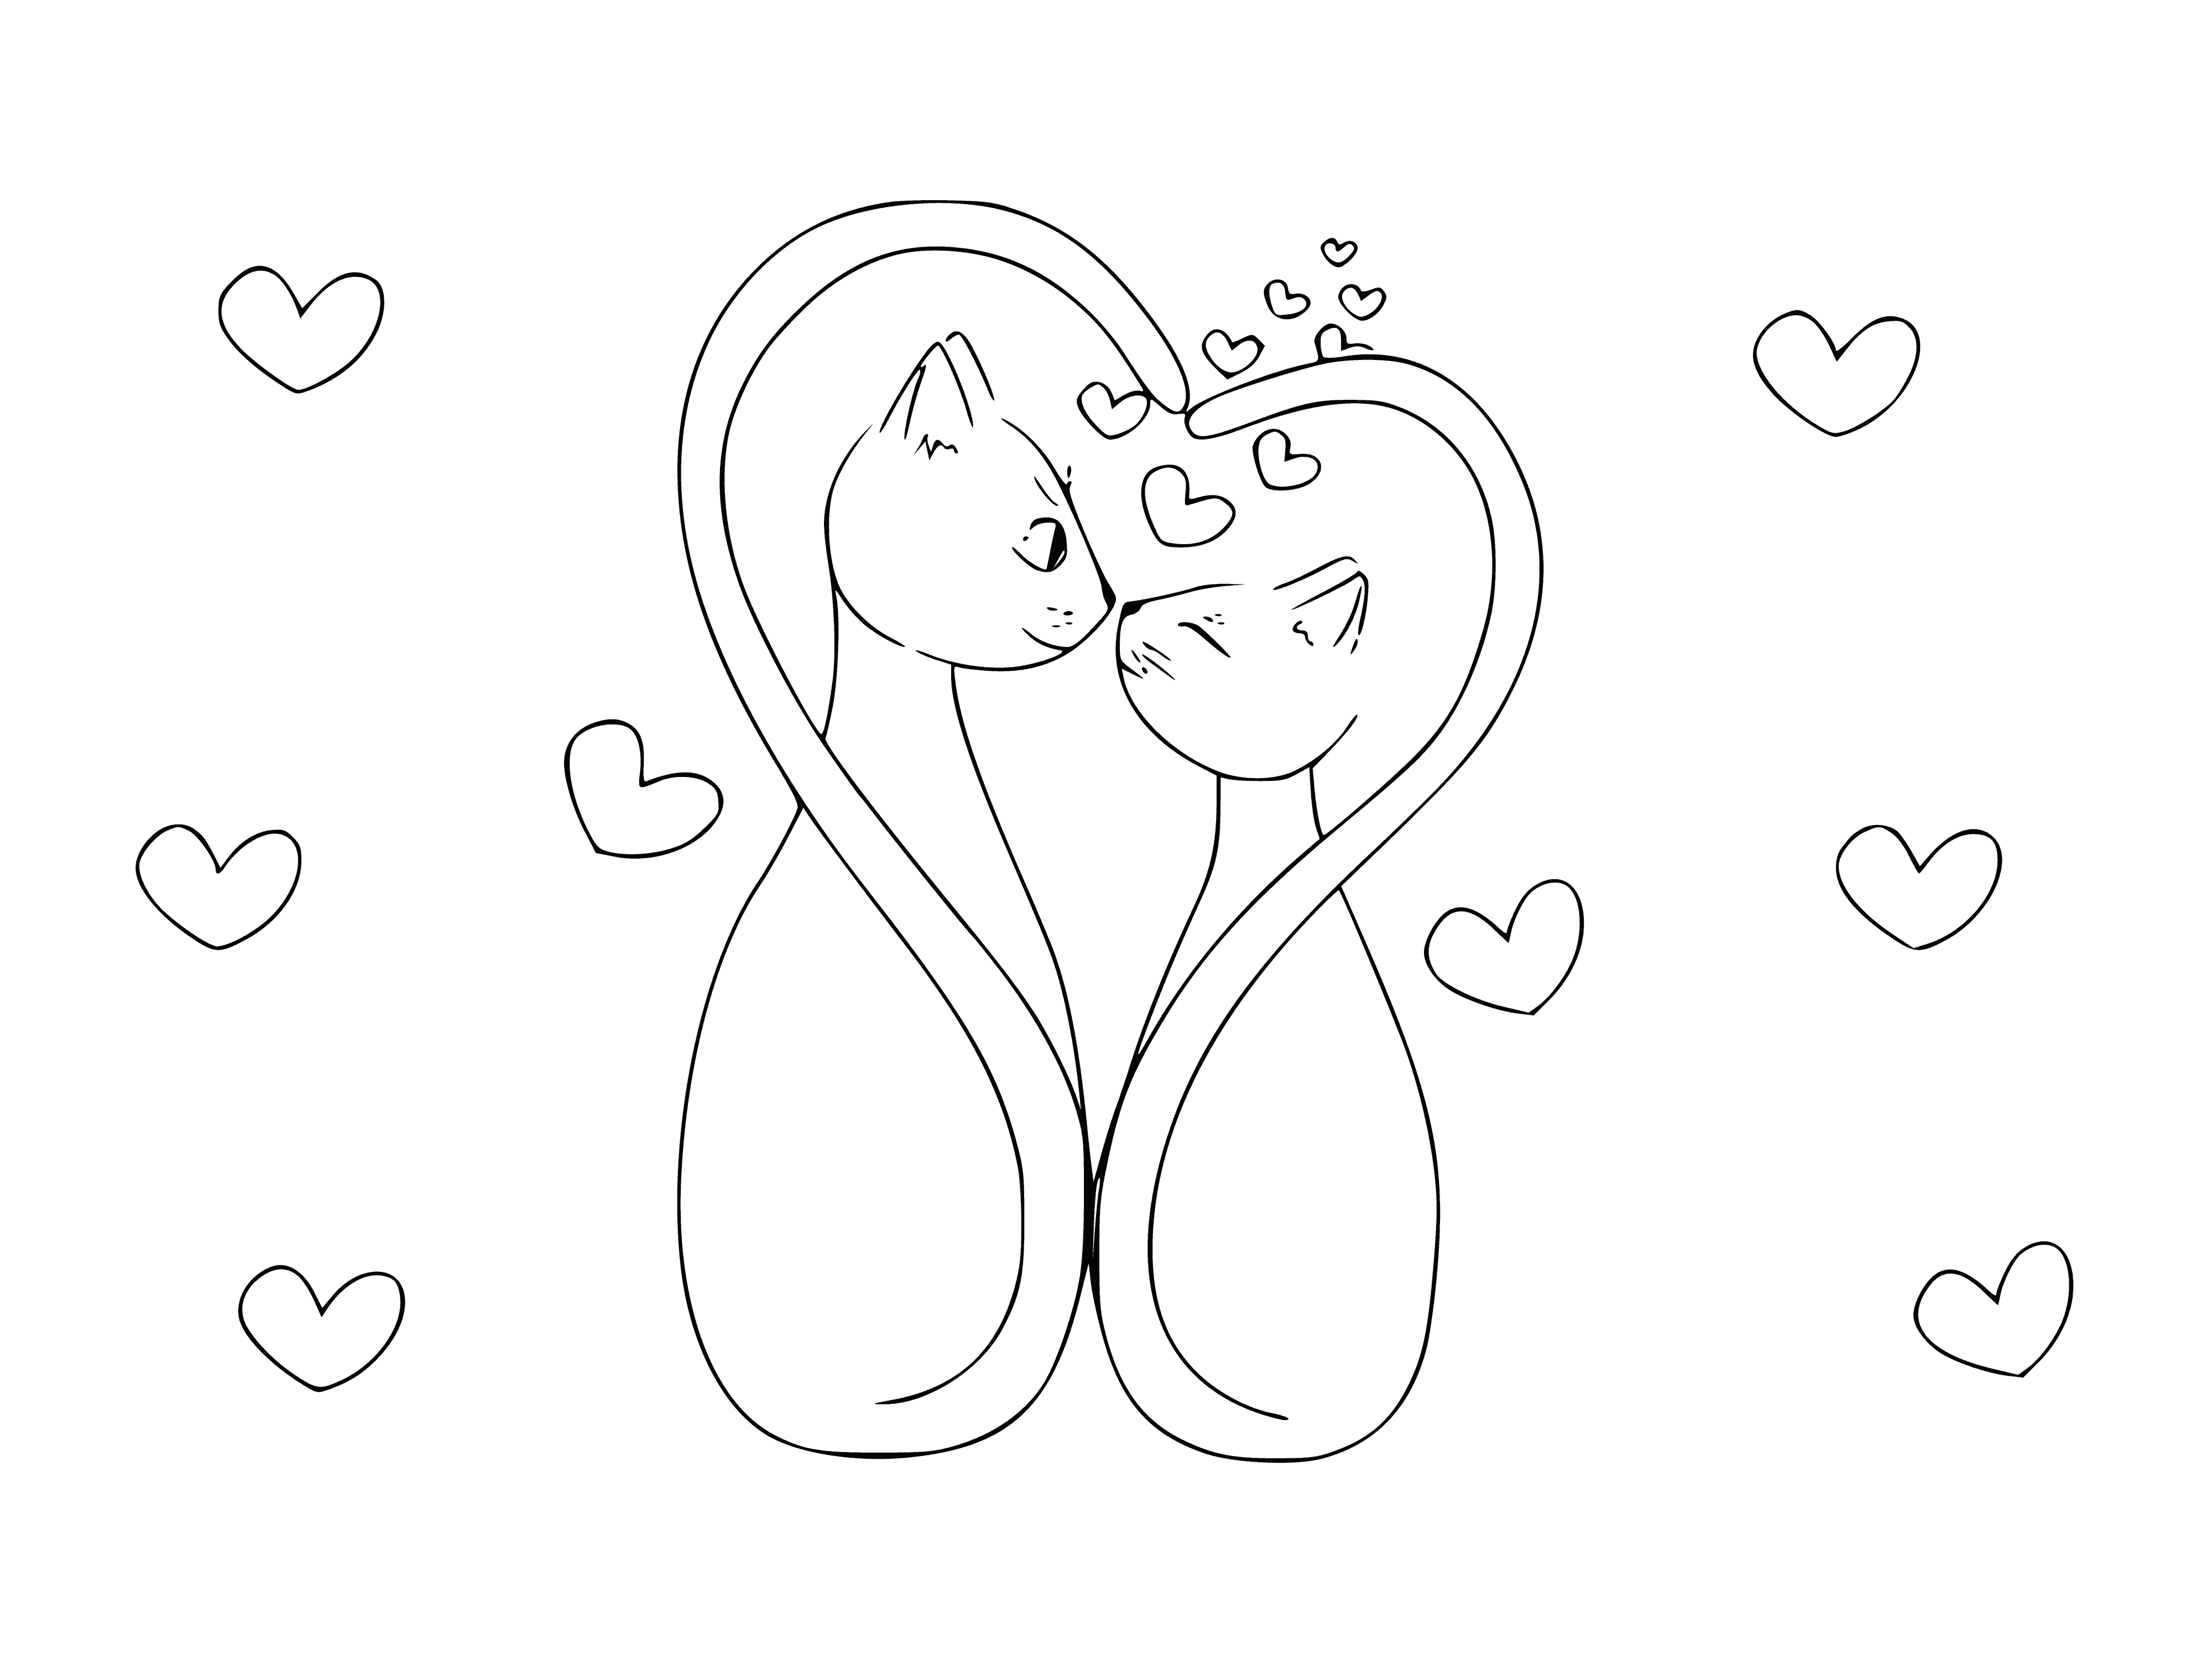 Cats in love coloring page